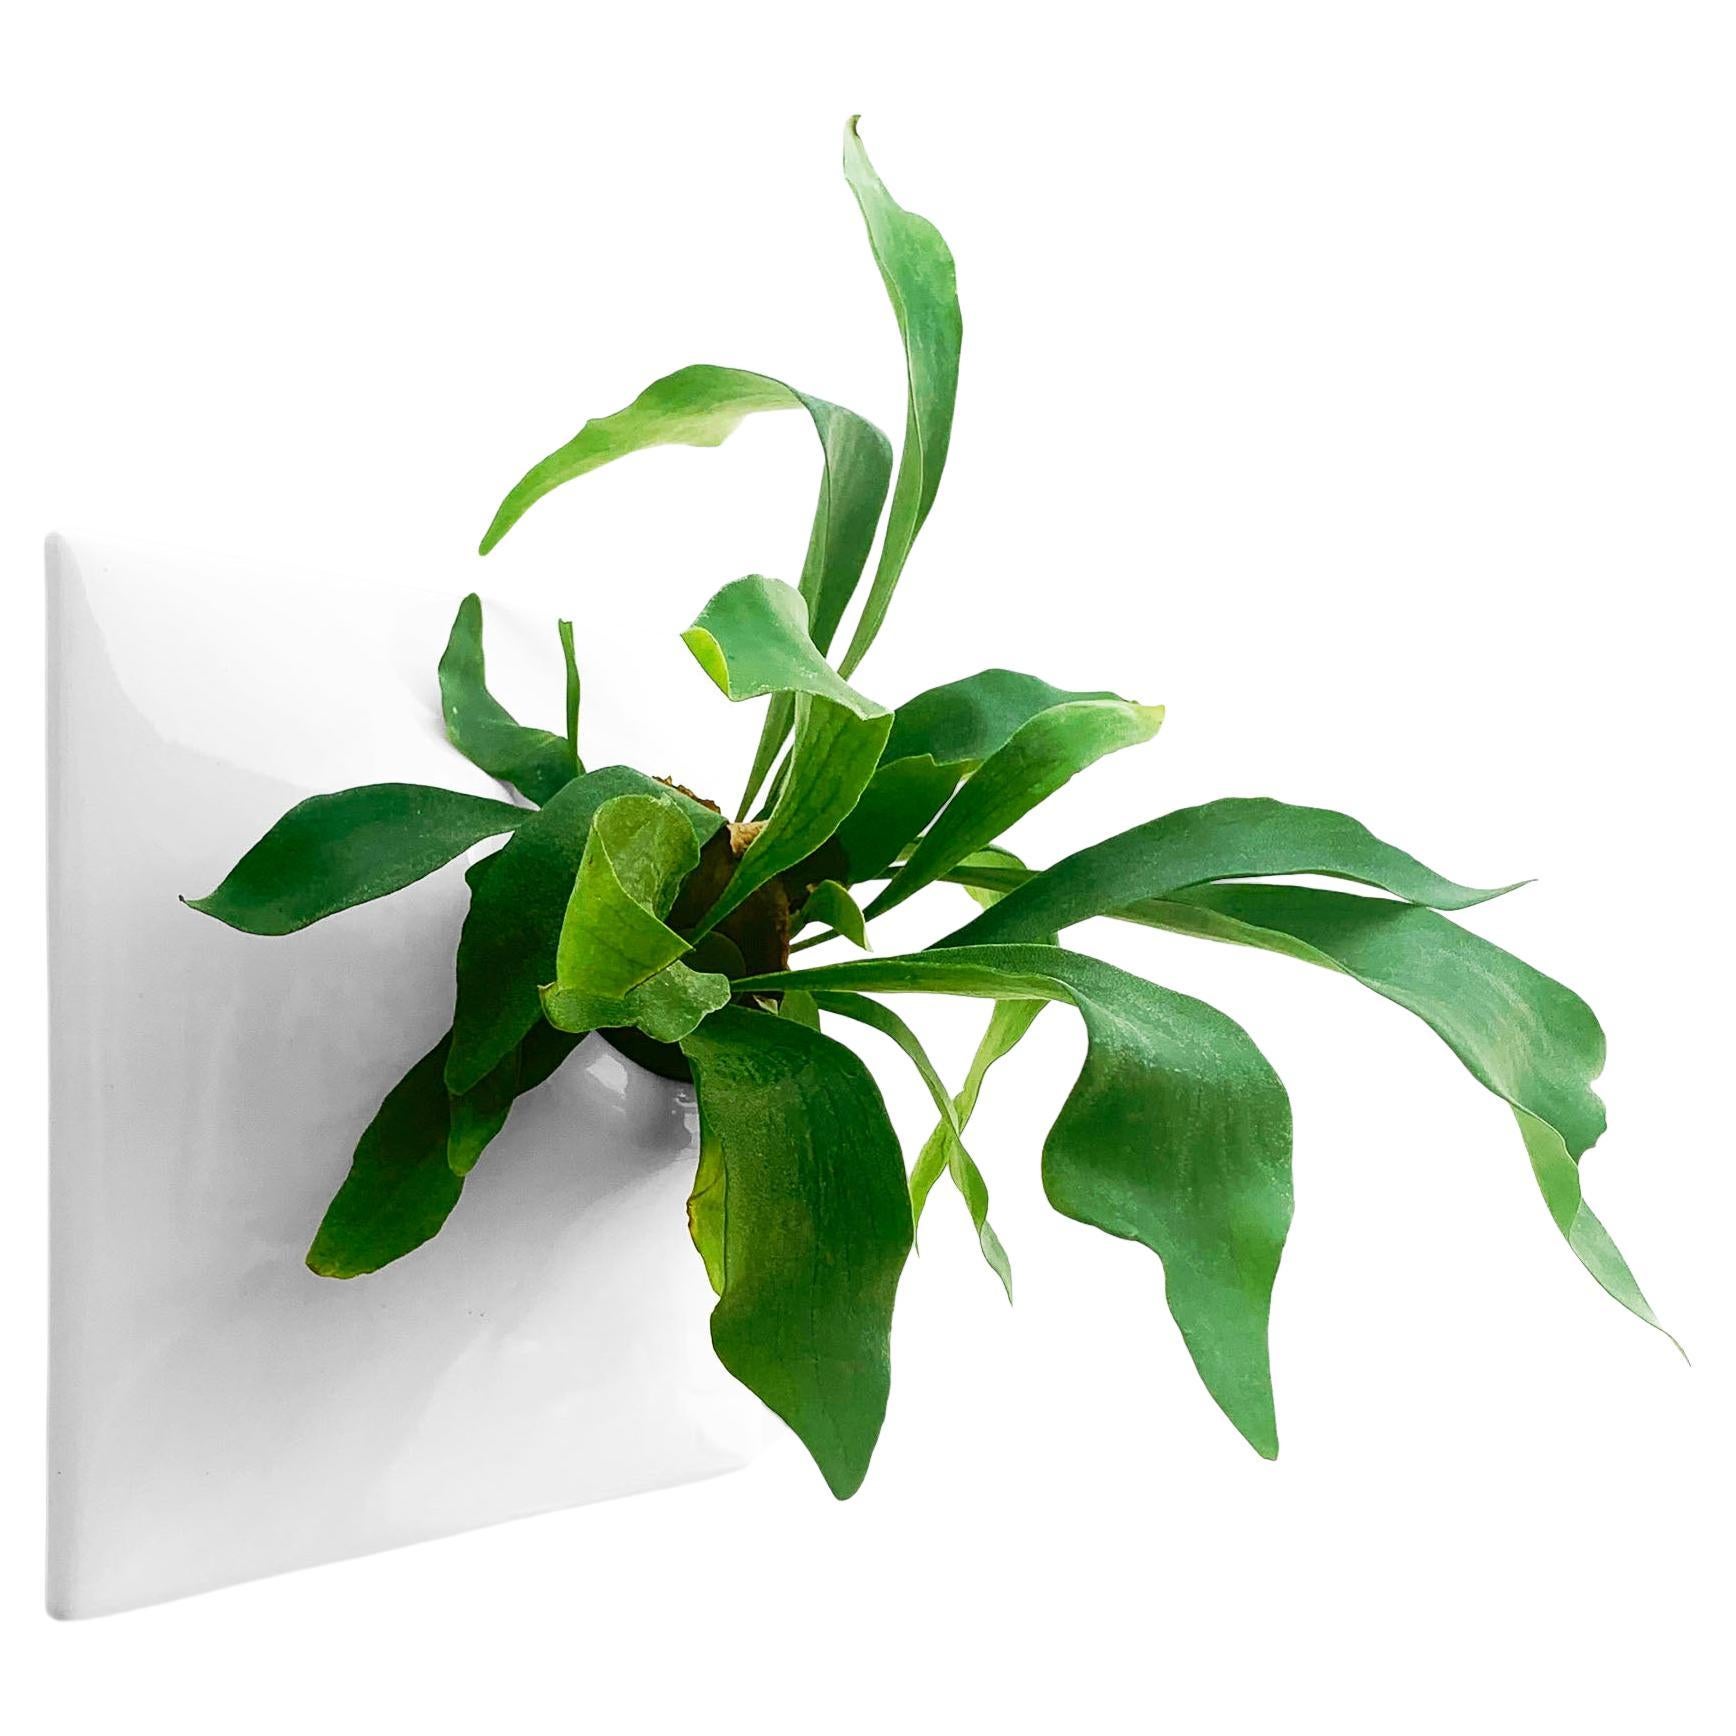 Modern White Wall Planter, Plant Wall Sculpture, Wall Art Decor, Node 12" Large For Sale